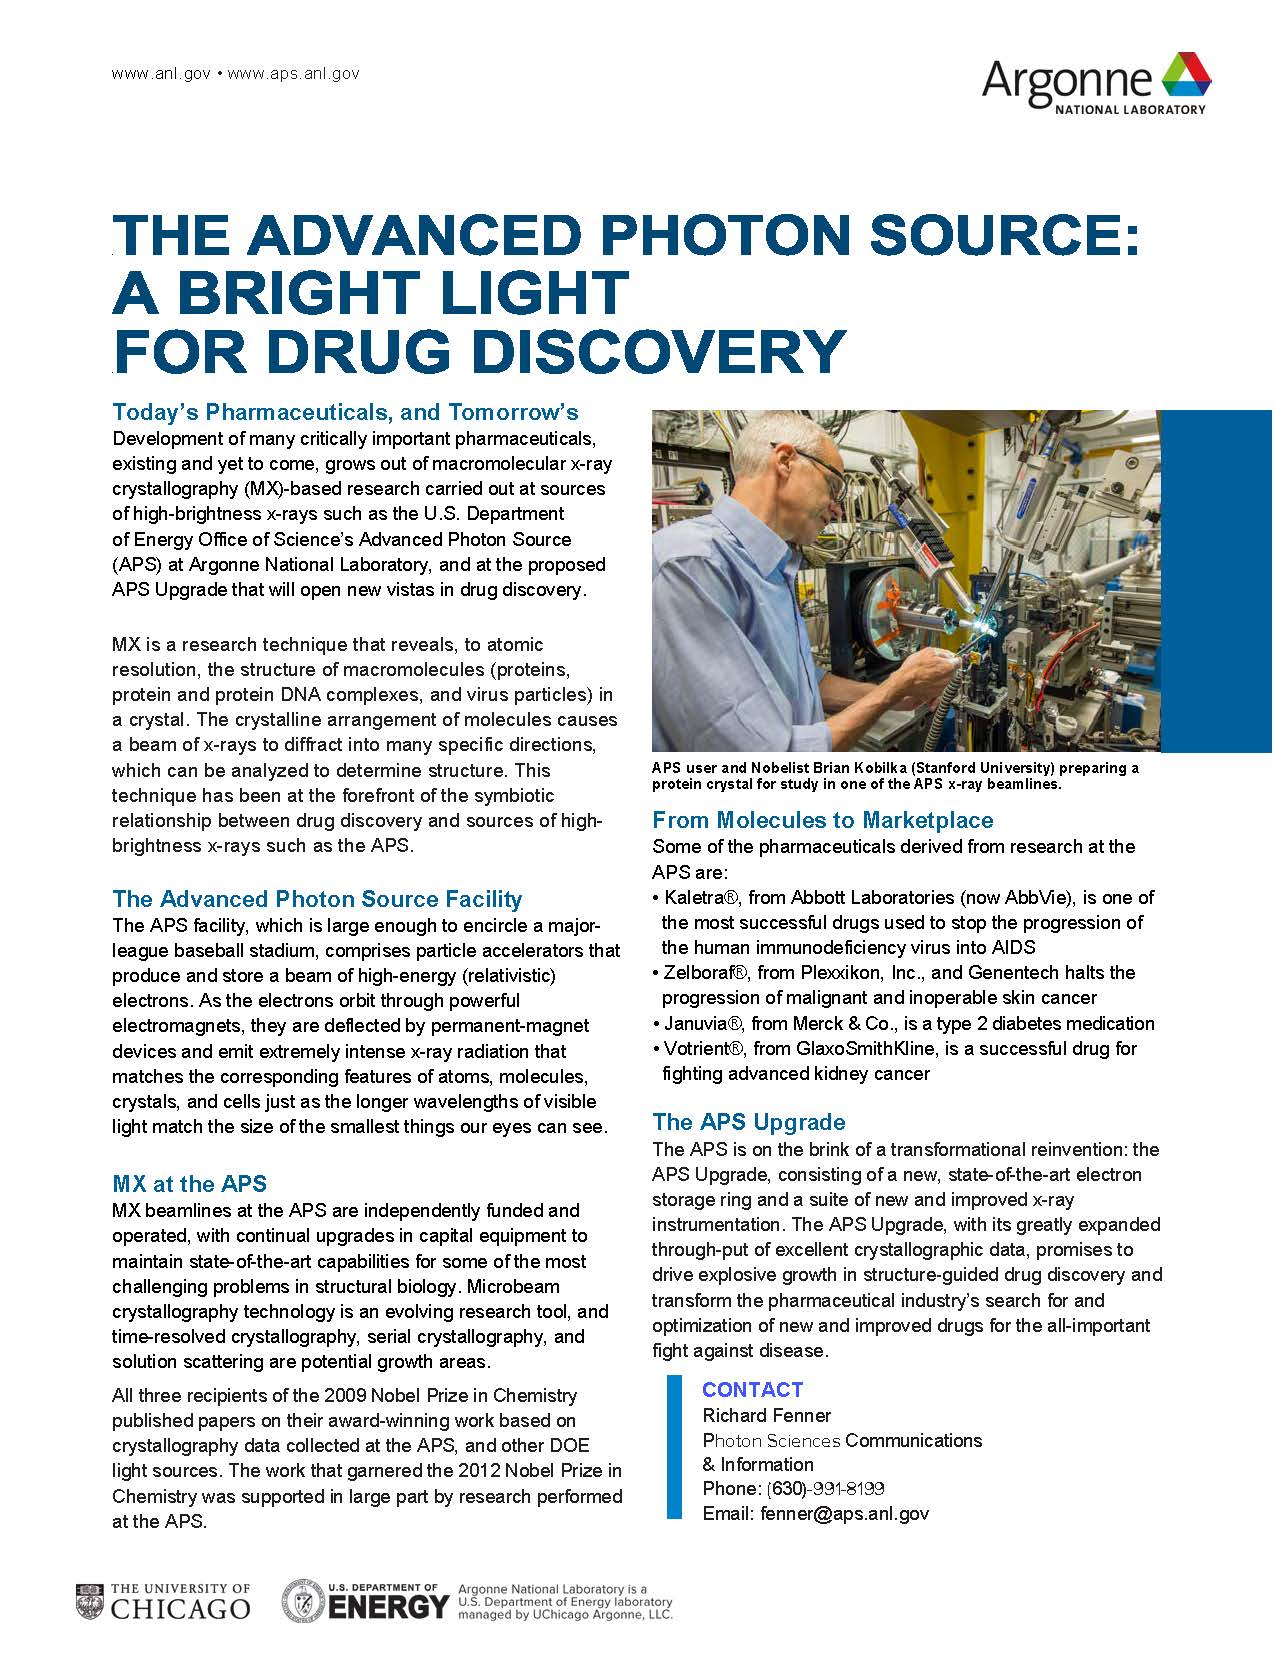 image of the factsheet "The Advanced Photon Source, A Bright Light for Drug Discovery"